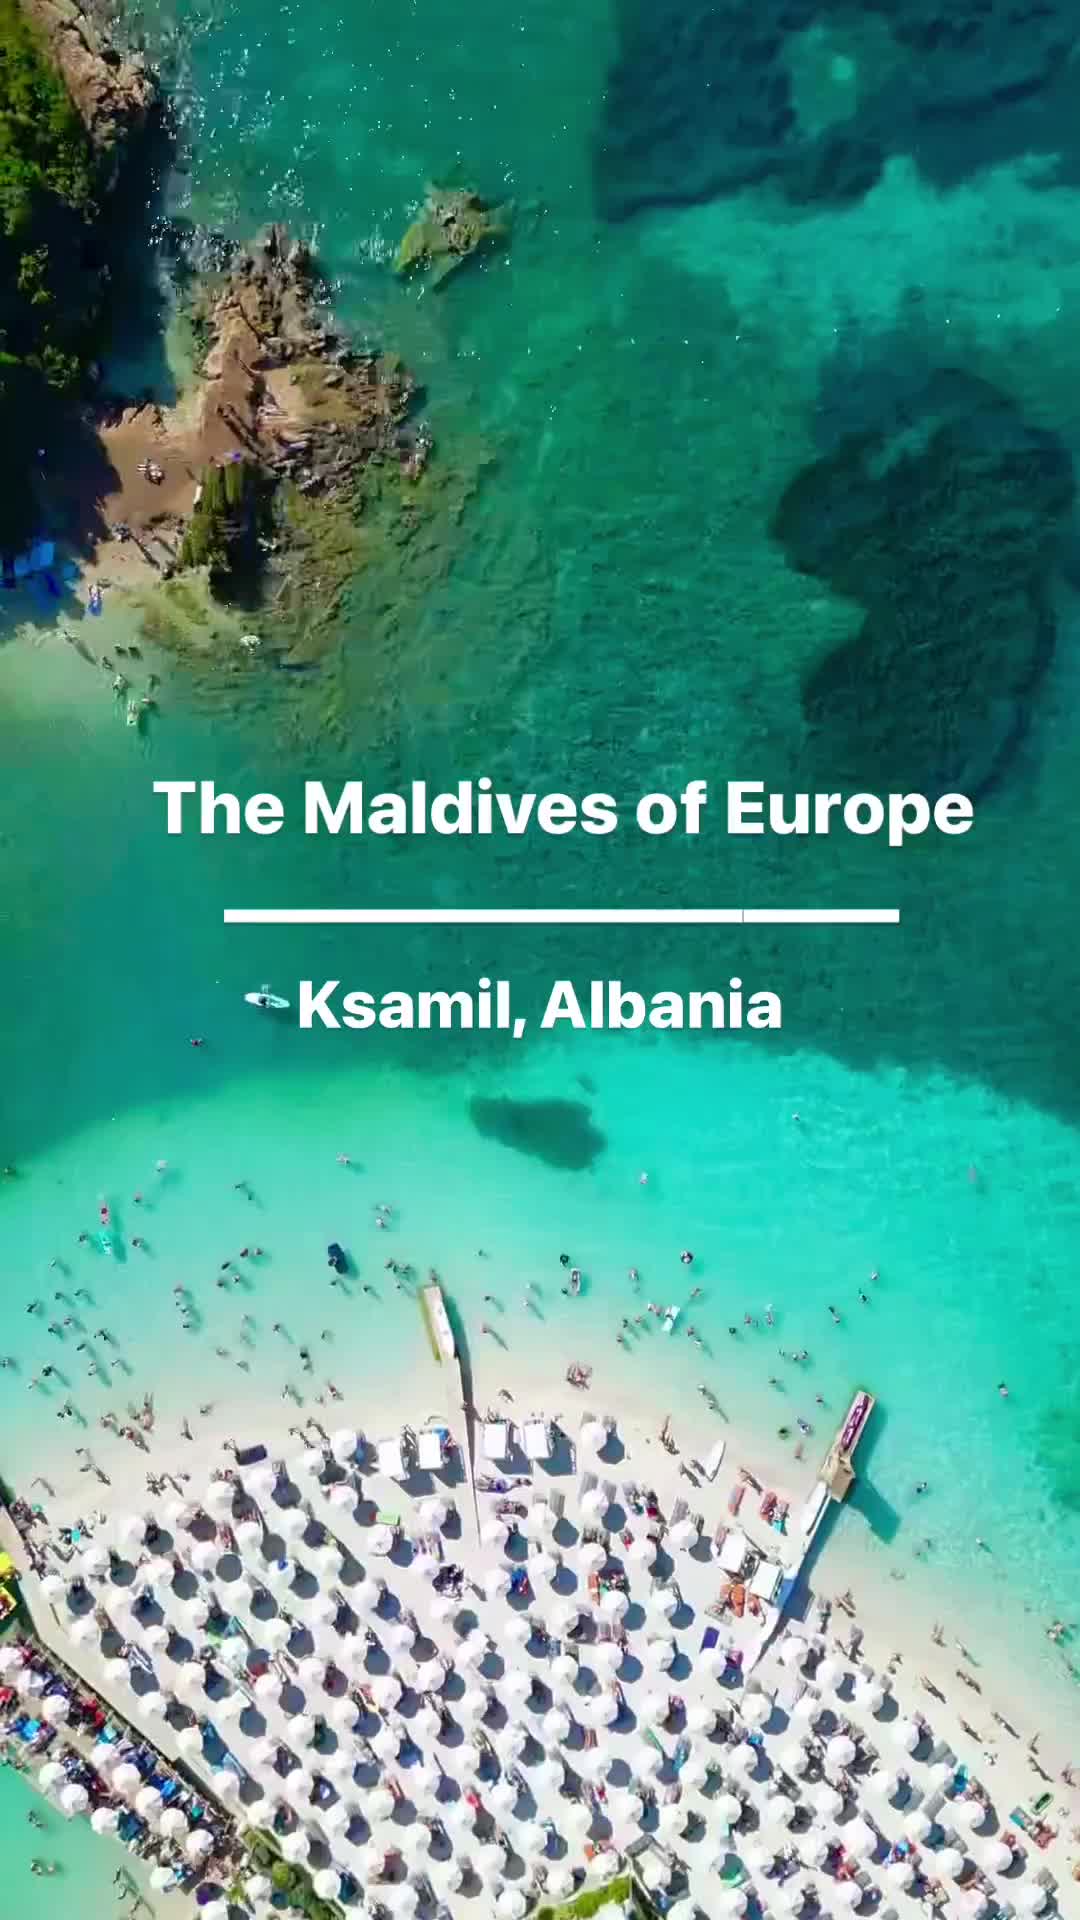 Ksamil is the paradise in Albania you can’t miss ! The nickname of the Maldives in Europe is fully deserved by its extraordinary beach experience !

🔹White sand beaches 
🔹Caribbean blue waters 
🔹Green islands 
🔹Beach clubs
🔹Sunset & nightlife

It might be busy but it’s the true definition of an amazing  Summer destination you need to go once in a lifetime!

Ready for that?

#ksamil #ksamil_albania #ksamilalbania #albania #visitalbania #albaniabeach #bestbeaches #paradise #paradisebeach #europetravel #europetrip #viralvideos #travelreels #reelsviral